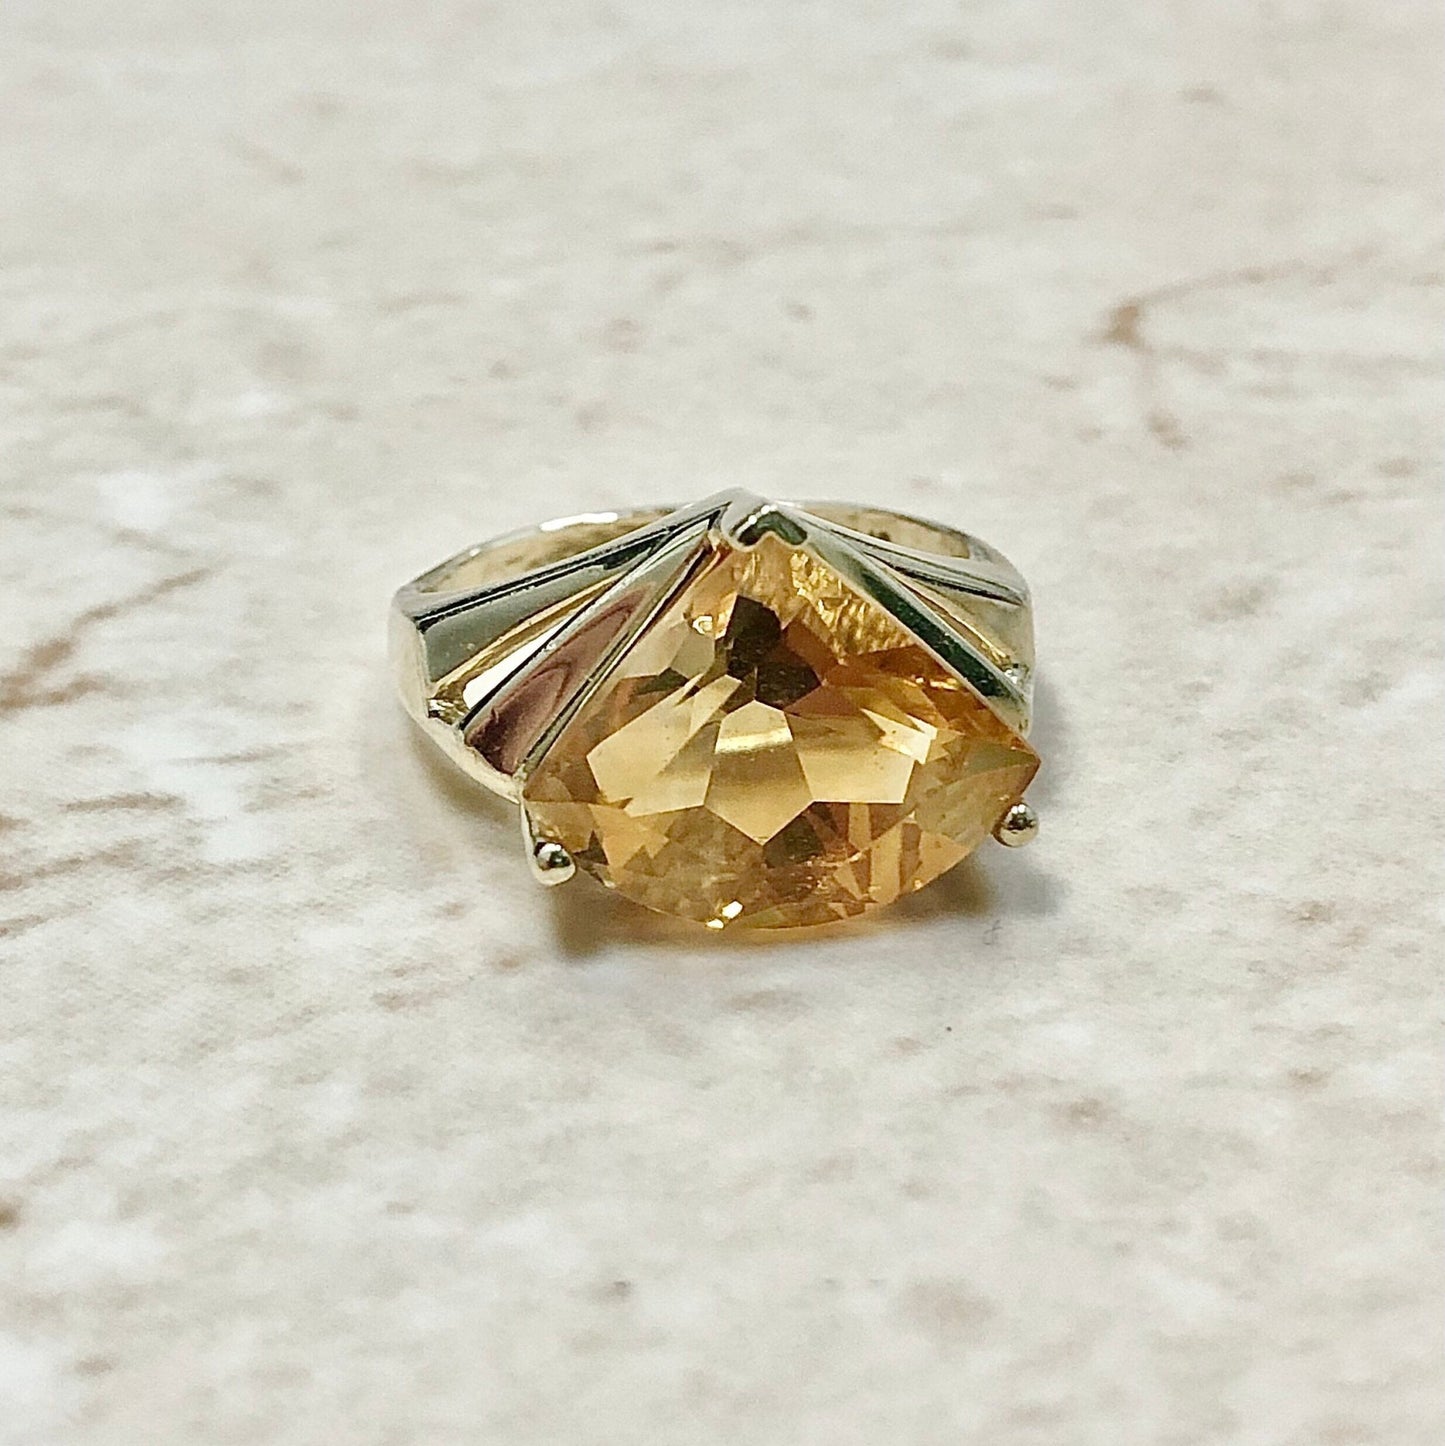 Vintage 14K Citrine Cocktail Ring in Yellow Gold - Statement Ring - Citrine Ring - November Birthstone - Birthday Gift For Her - Size 7.75